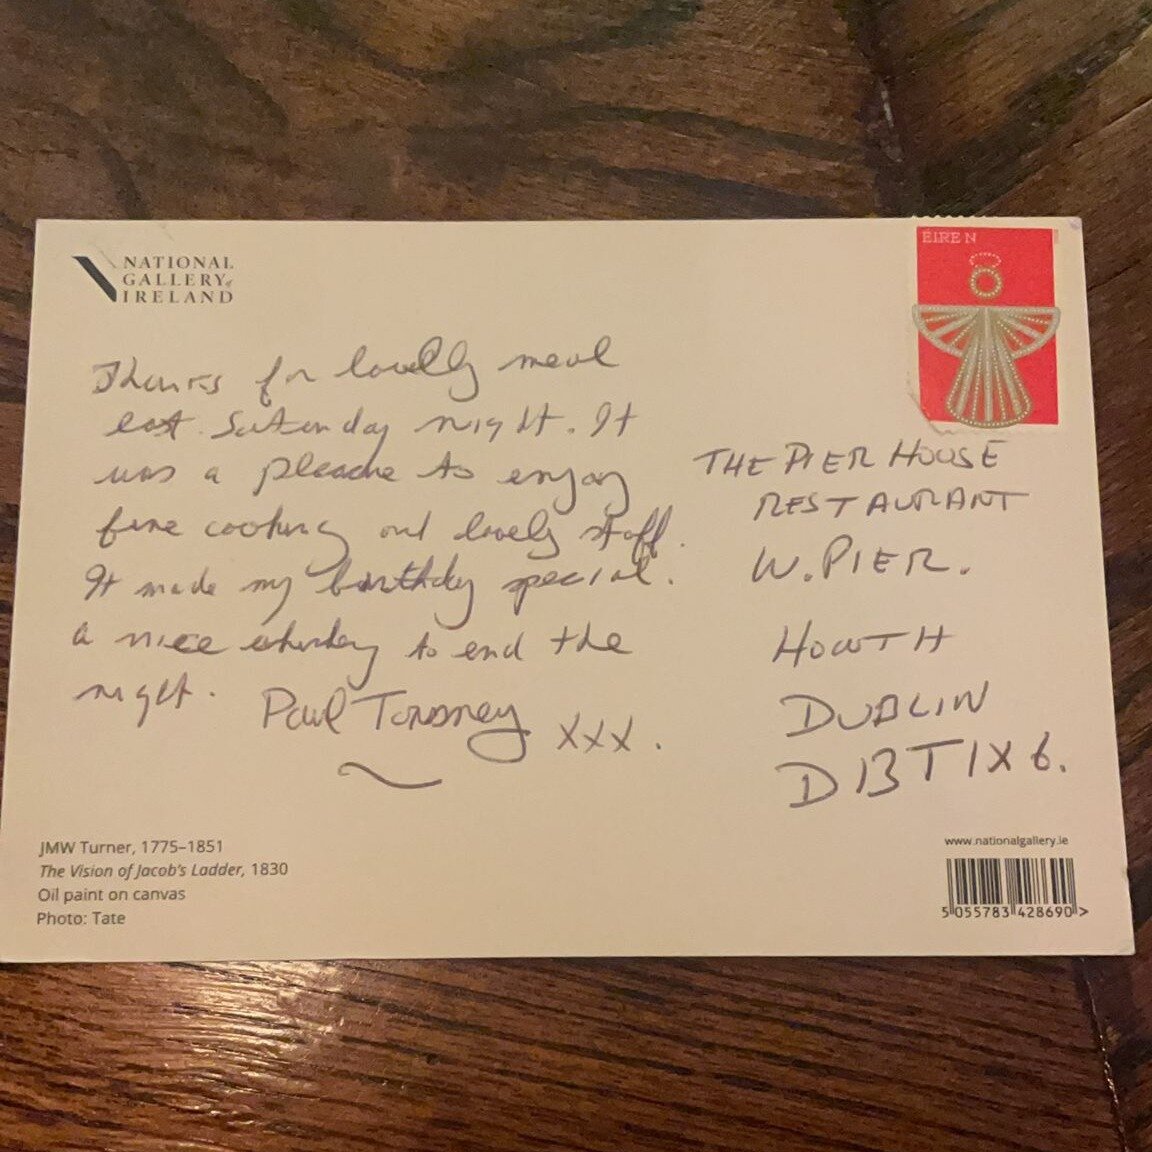 A customer posted this wonderful post card to us and it made our day; 🥰 ✉️

&quot;Thanks for a lovely meal last Saturday night. It was a pleasure to enjoy fine cooking and lovely staff. It made my birthday special. A nice whisky to end the night.&qu